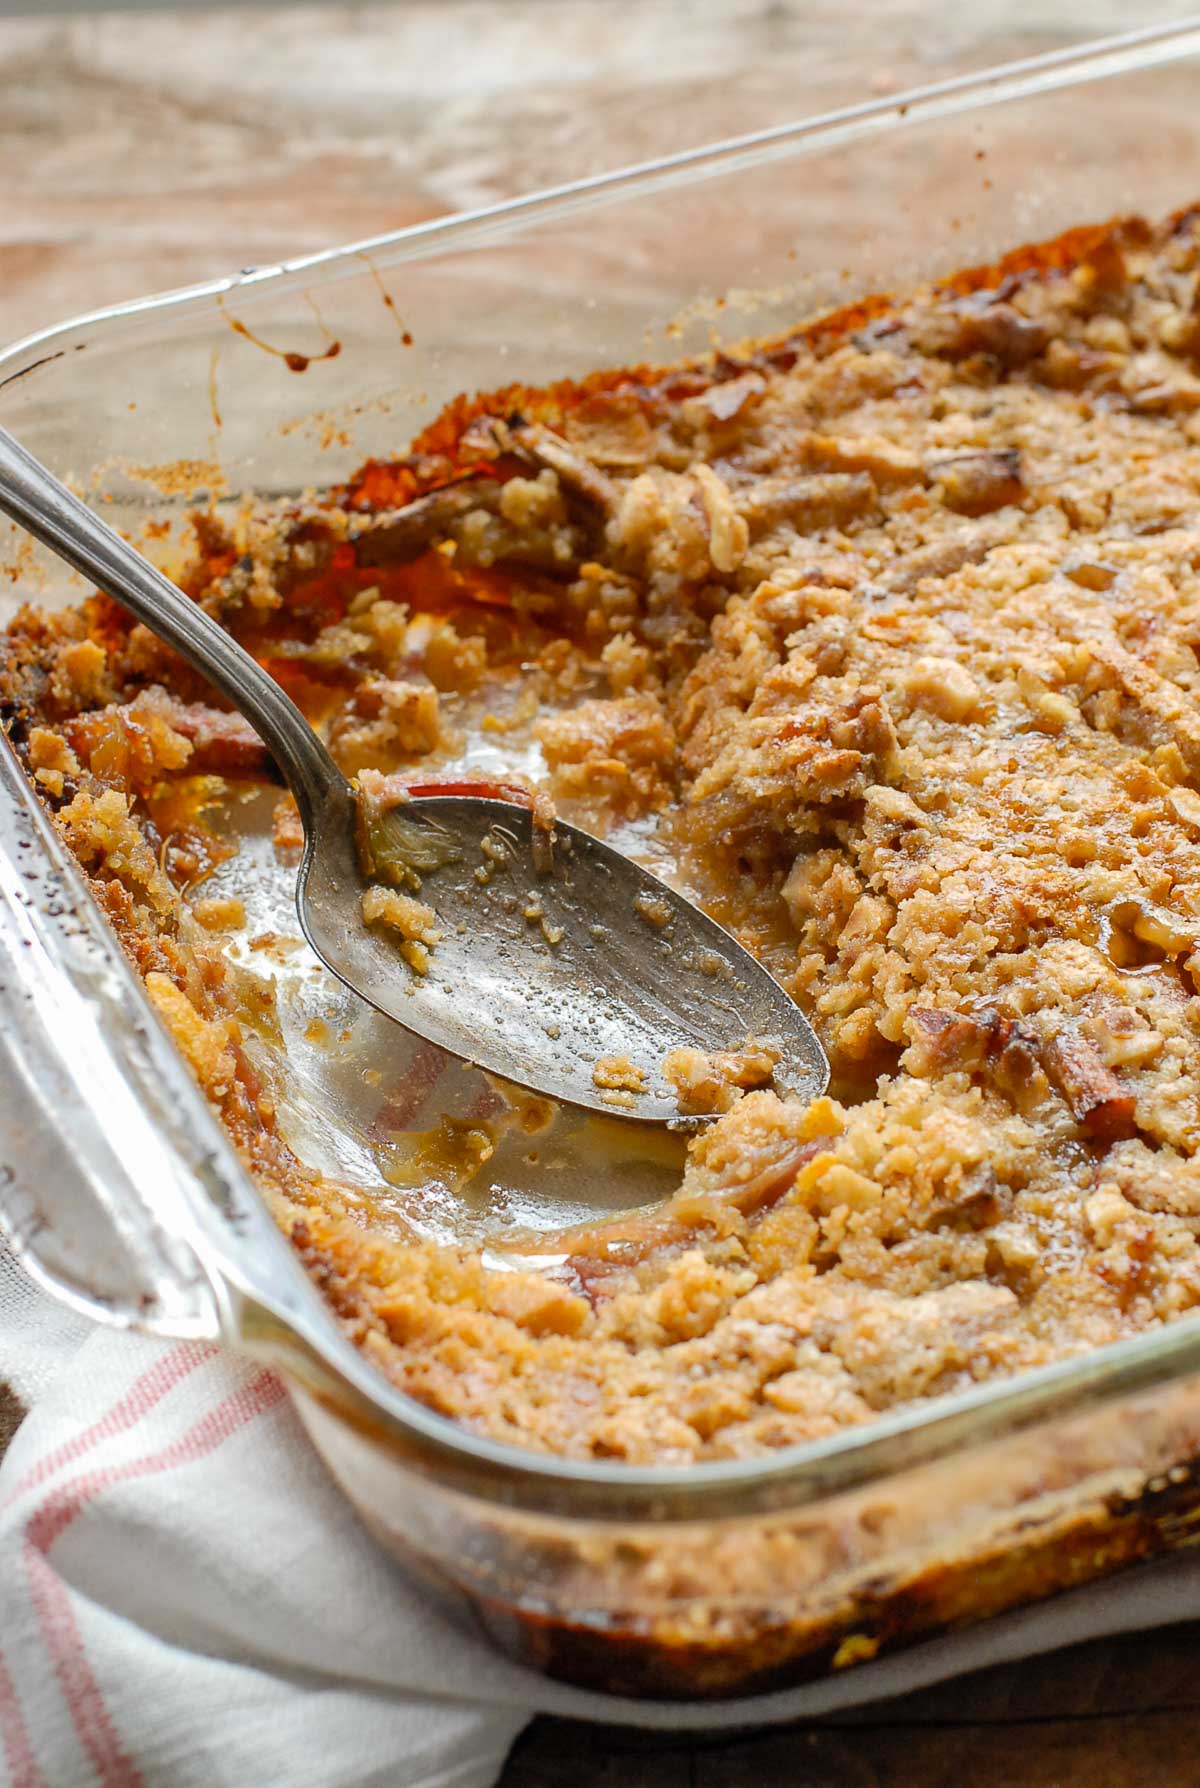 Rhubarb Crisp in a baking pan with serving spoon